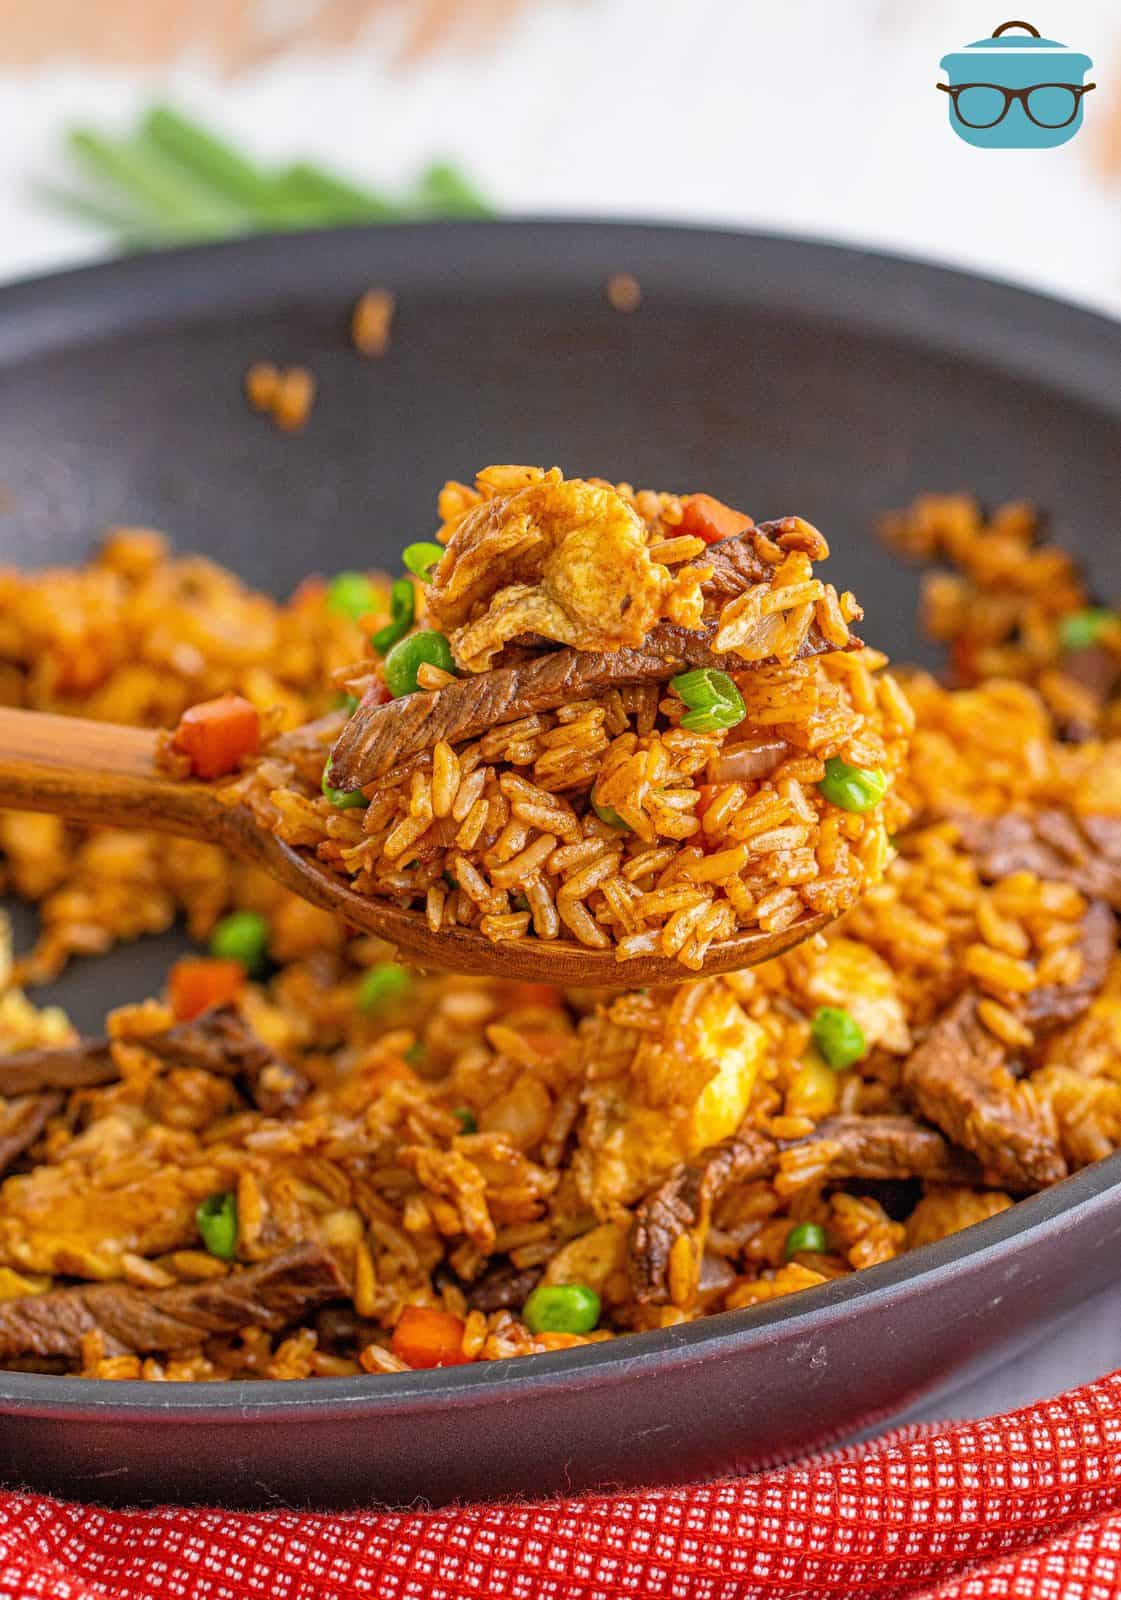 Wooden spoon holding up some of the Beef Fried Rice out of pan.